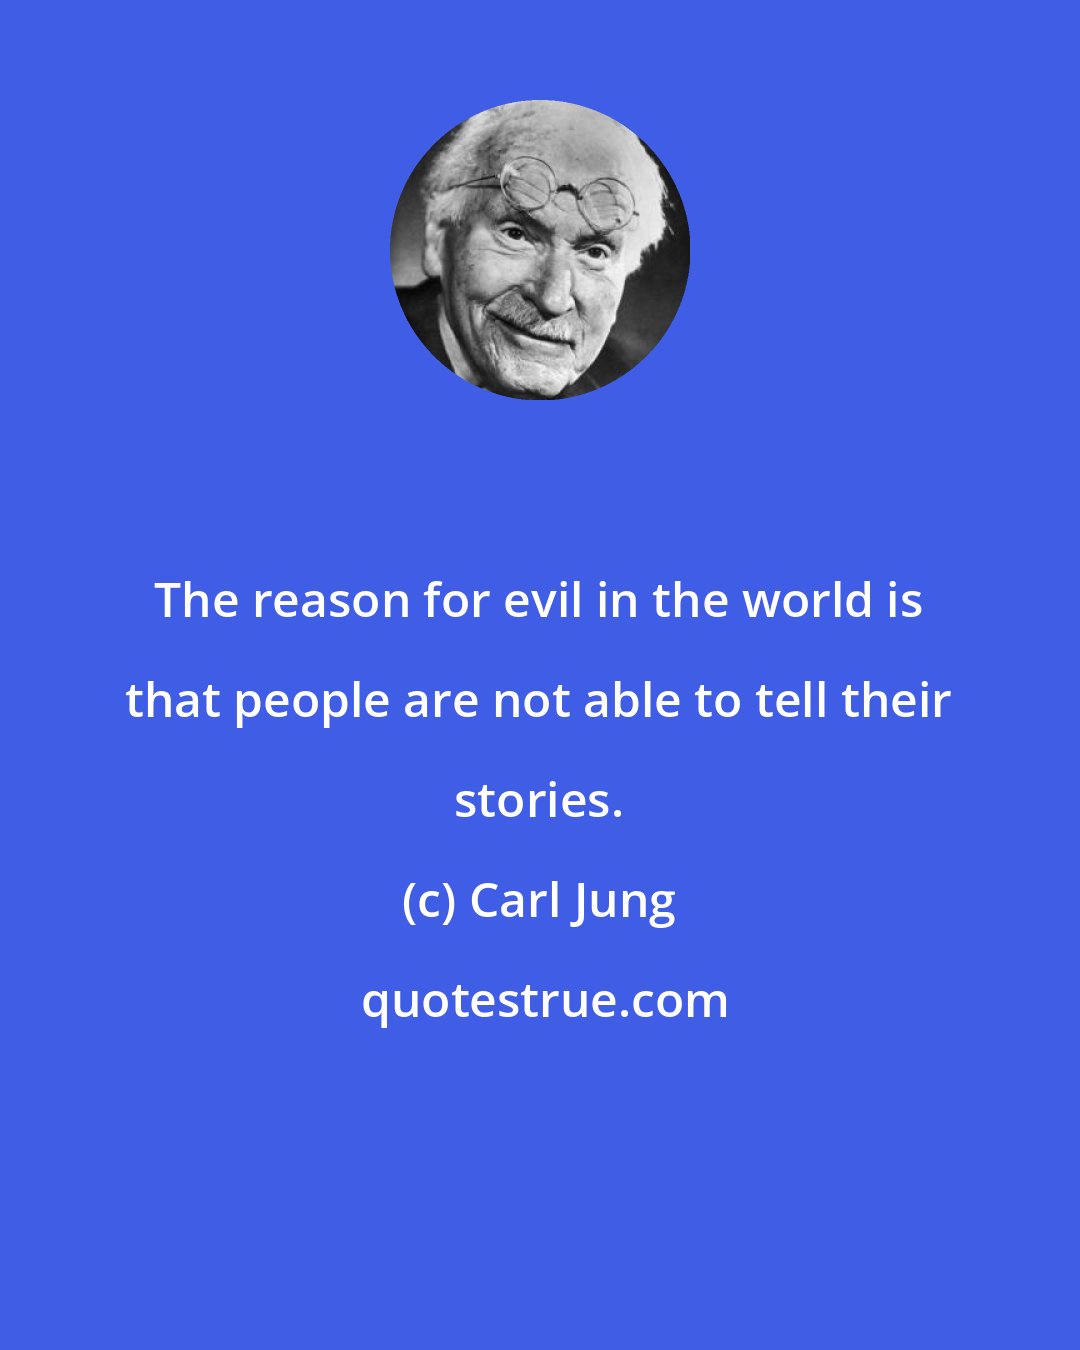 Carl Jung: The reason for evil in the world is that people are not able to tell their stories.